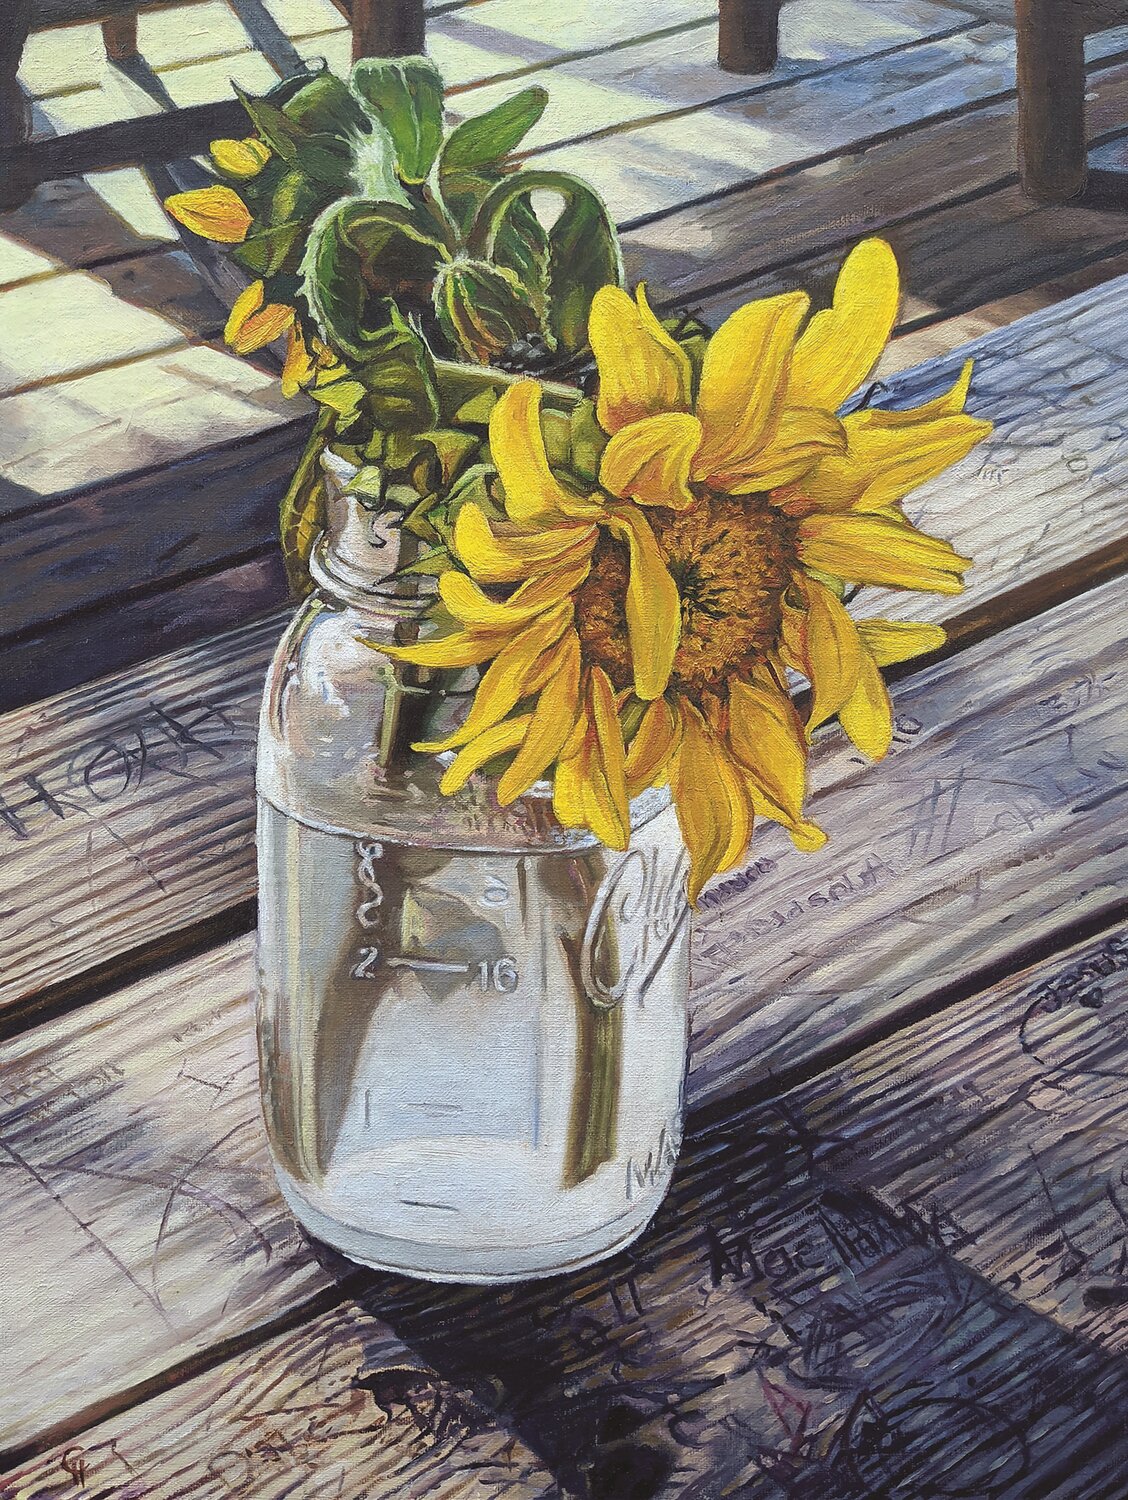 Christi Hetrick’s oil painting, Good Morning Sunshine (oil on linen panel), invites viewers to think about all the people who had carved the graffiti near her sunflowers.